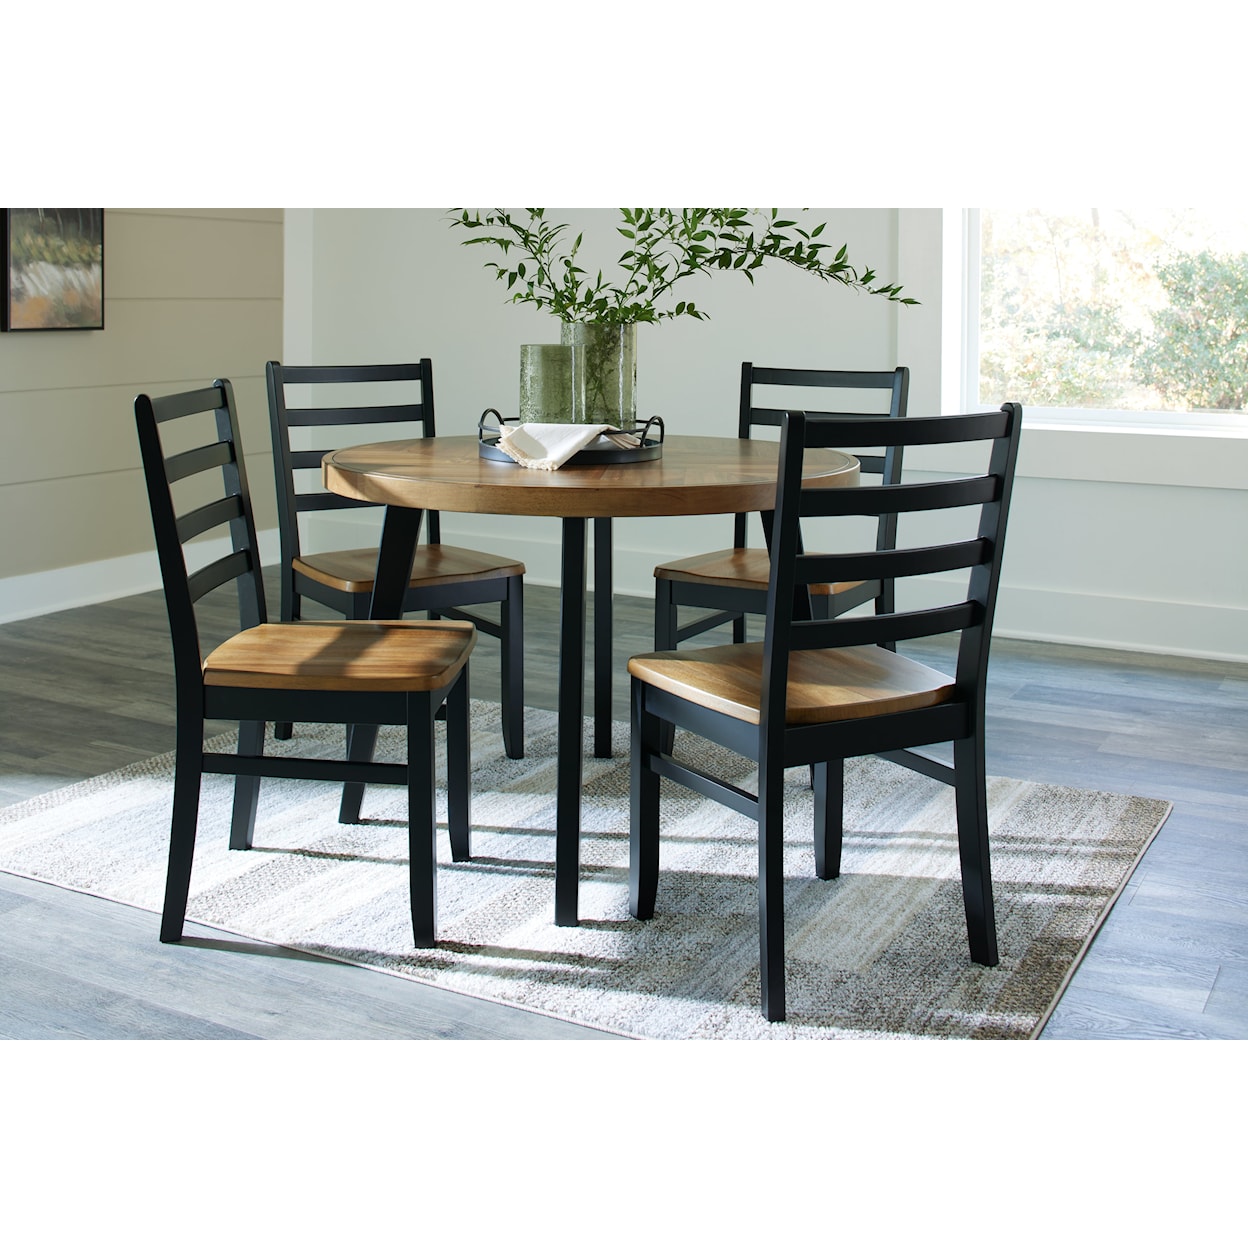 StyleLine Blondon Dining Table And 4 Chairs (Set Of 5)